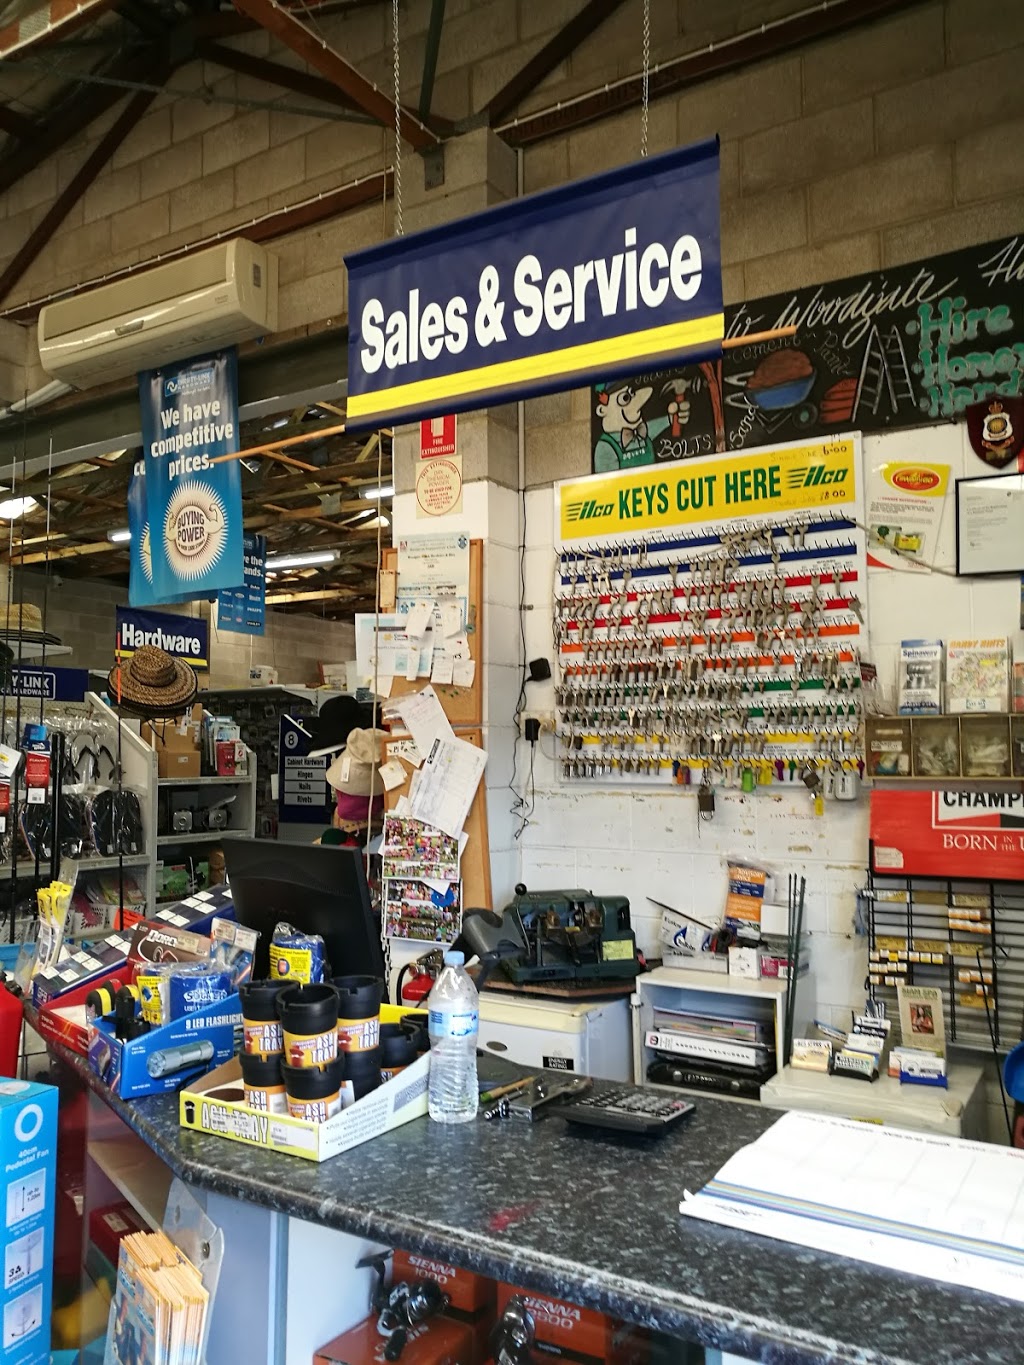 Thrifty-Link Hardware - Woodgate Beach Hardware | hardware store | 10 Frizzells Rd, Woodgate QLD 4660, Australia | 0741268727 OR +61 7 4126 8727